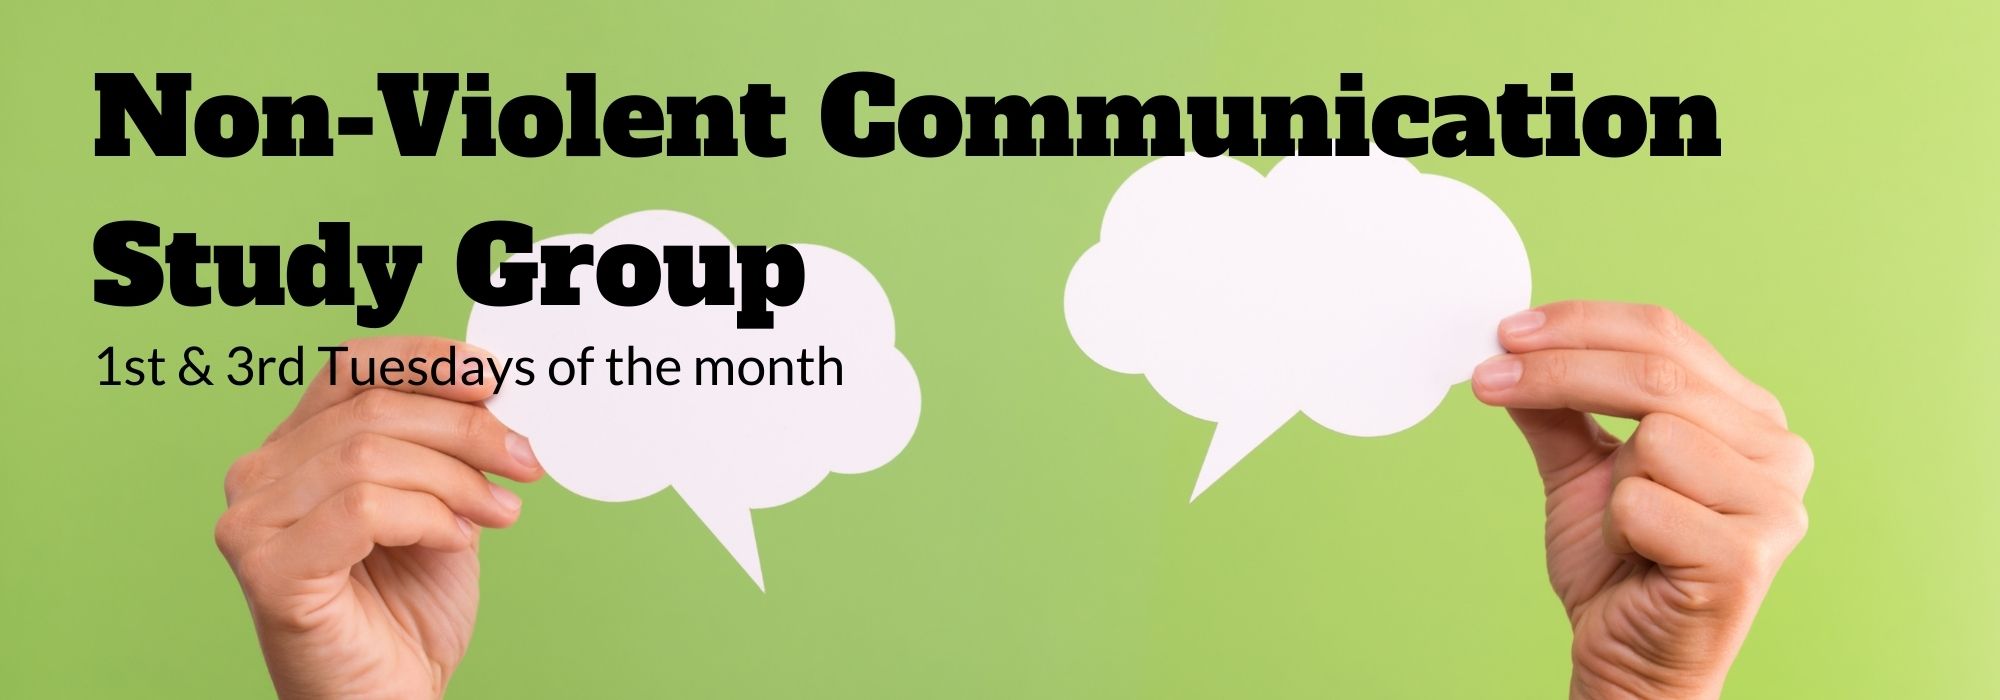 Non-Violent Communication Study Group, first and third Tuesdays of the month